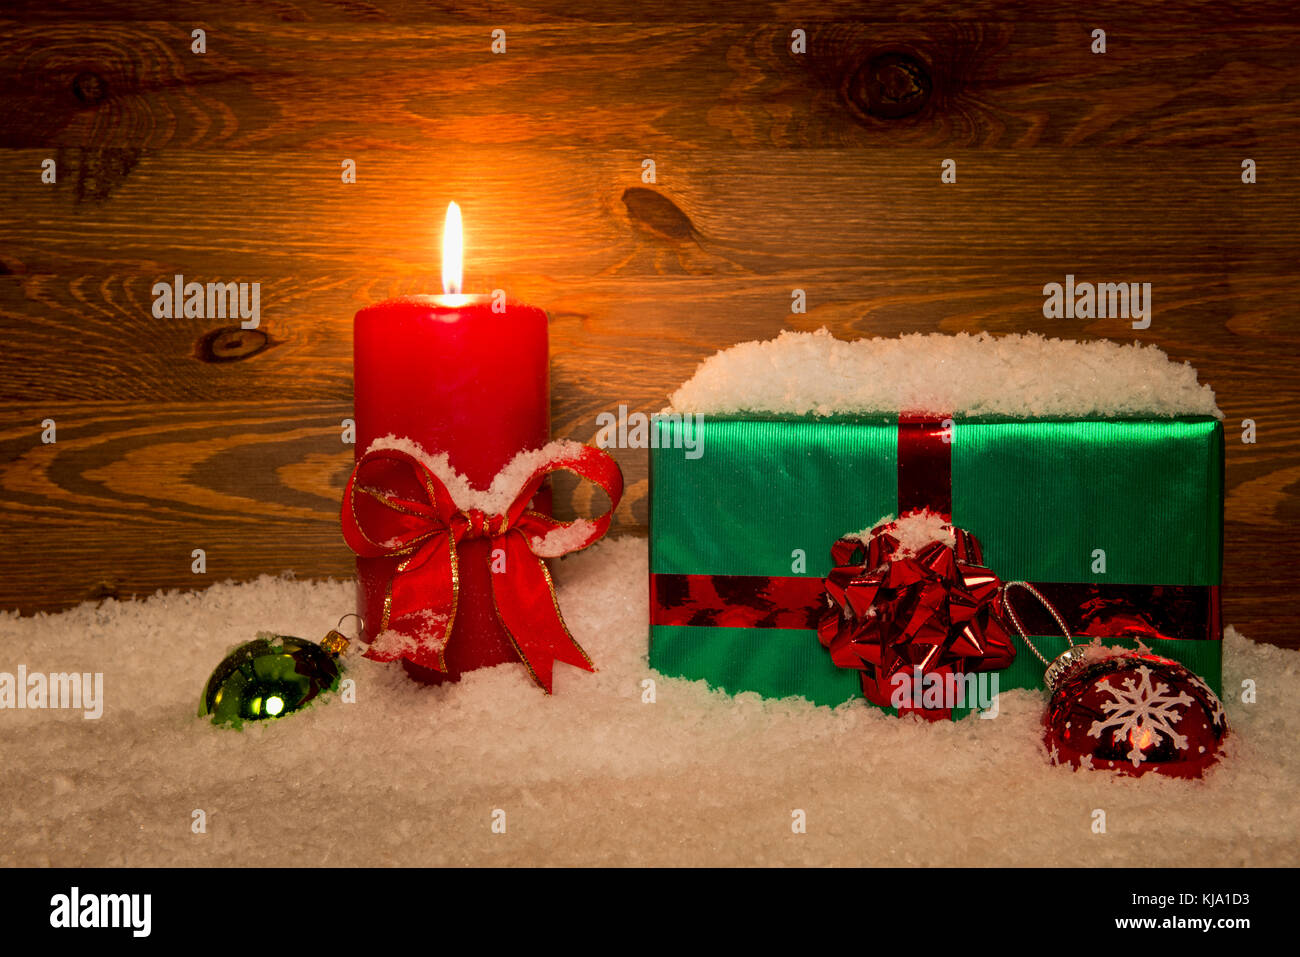 A gift wrapped Christmas present with candle and snow against a wooden background. Stock Photo